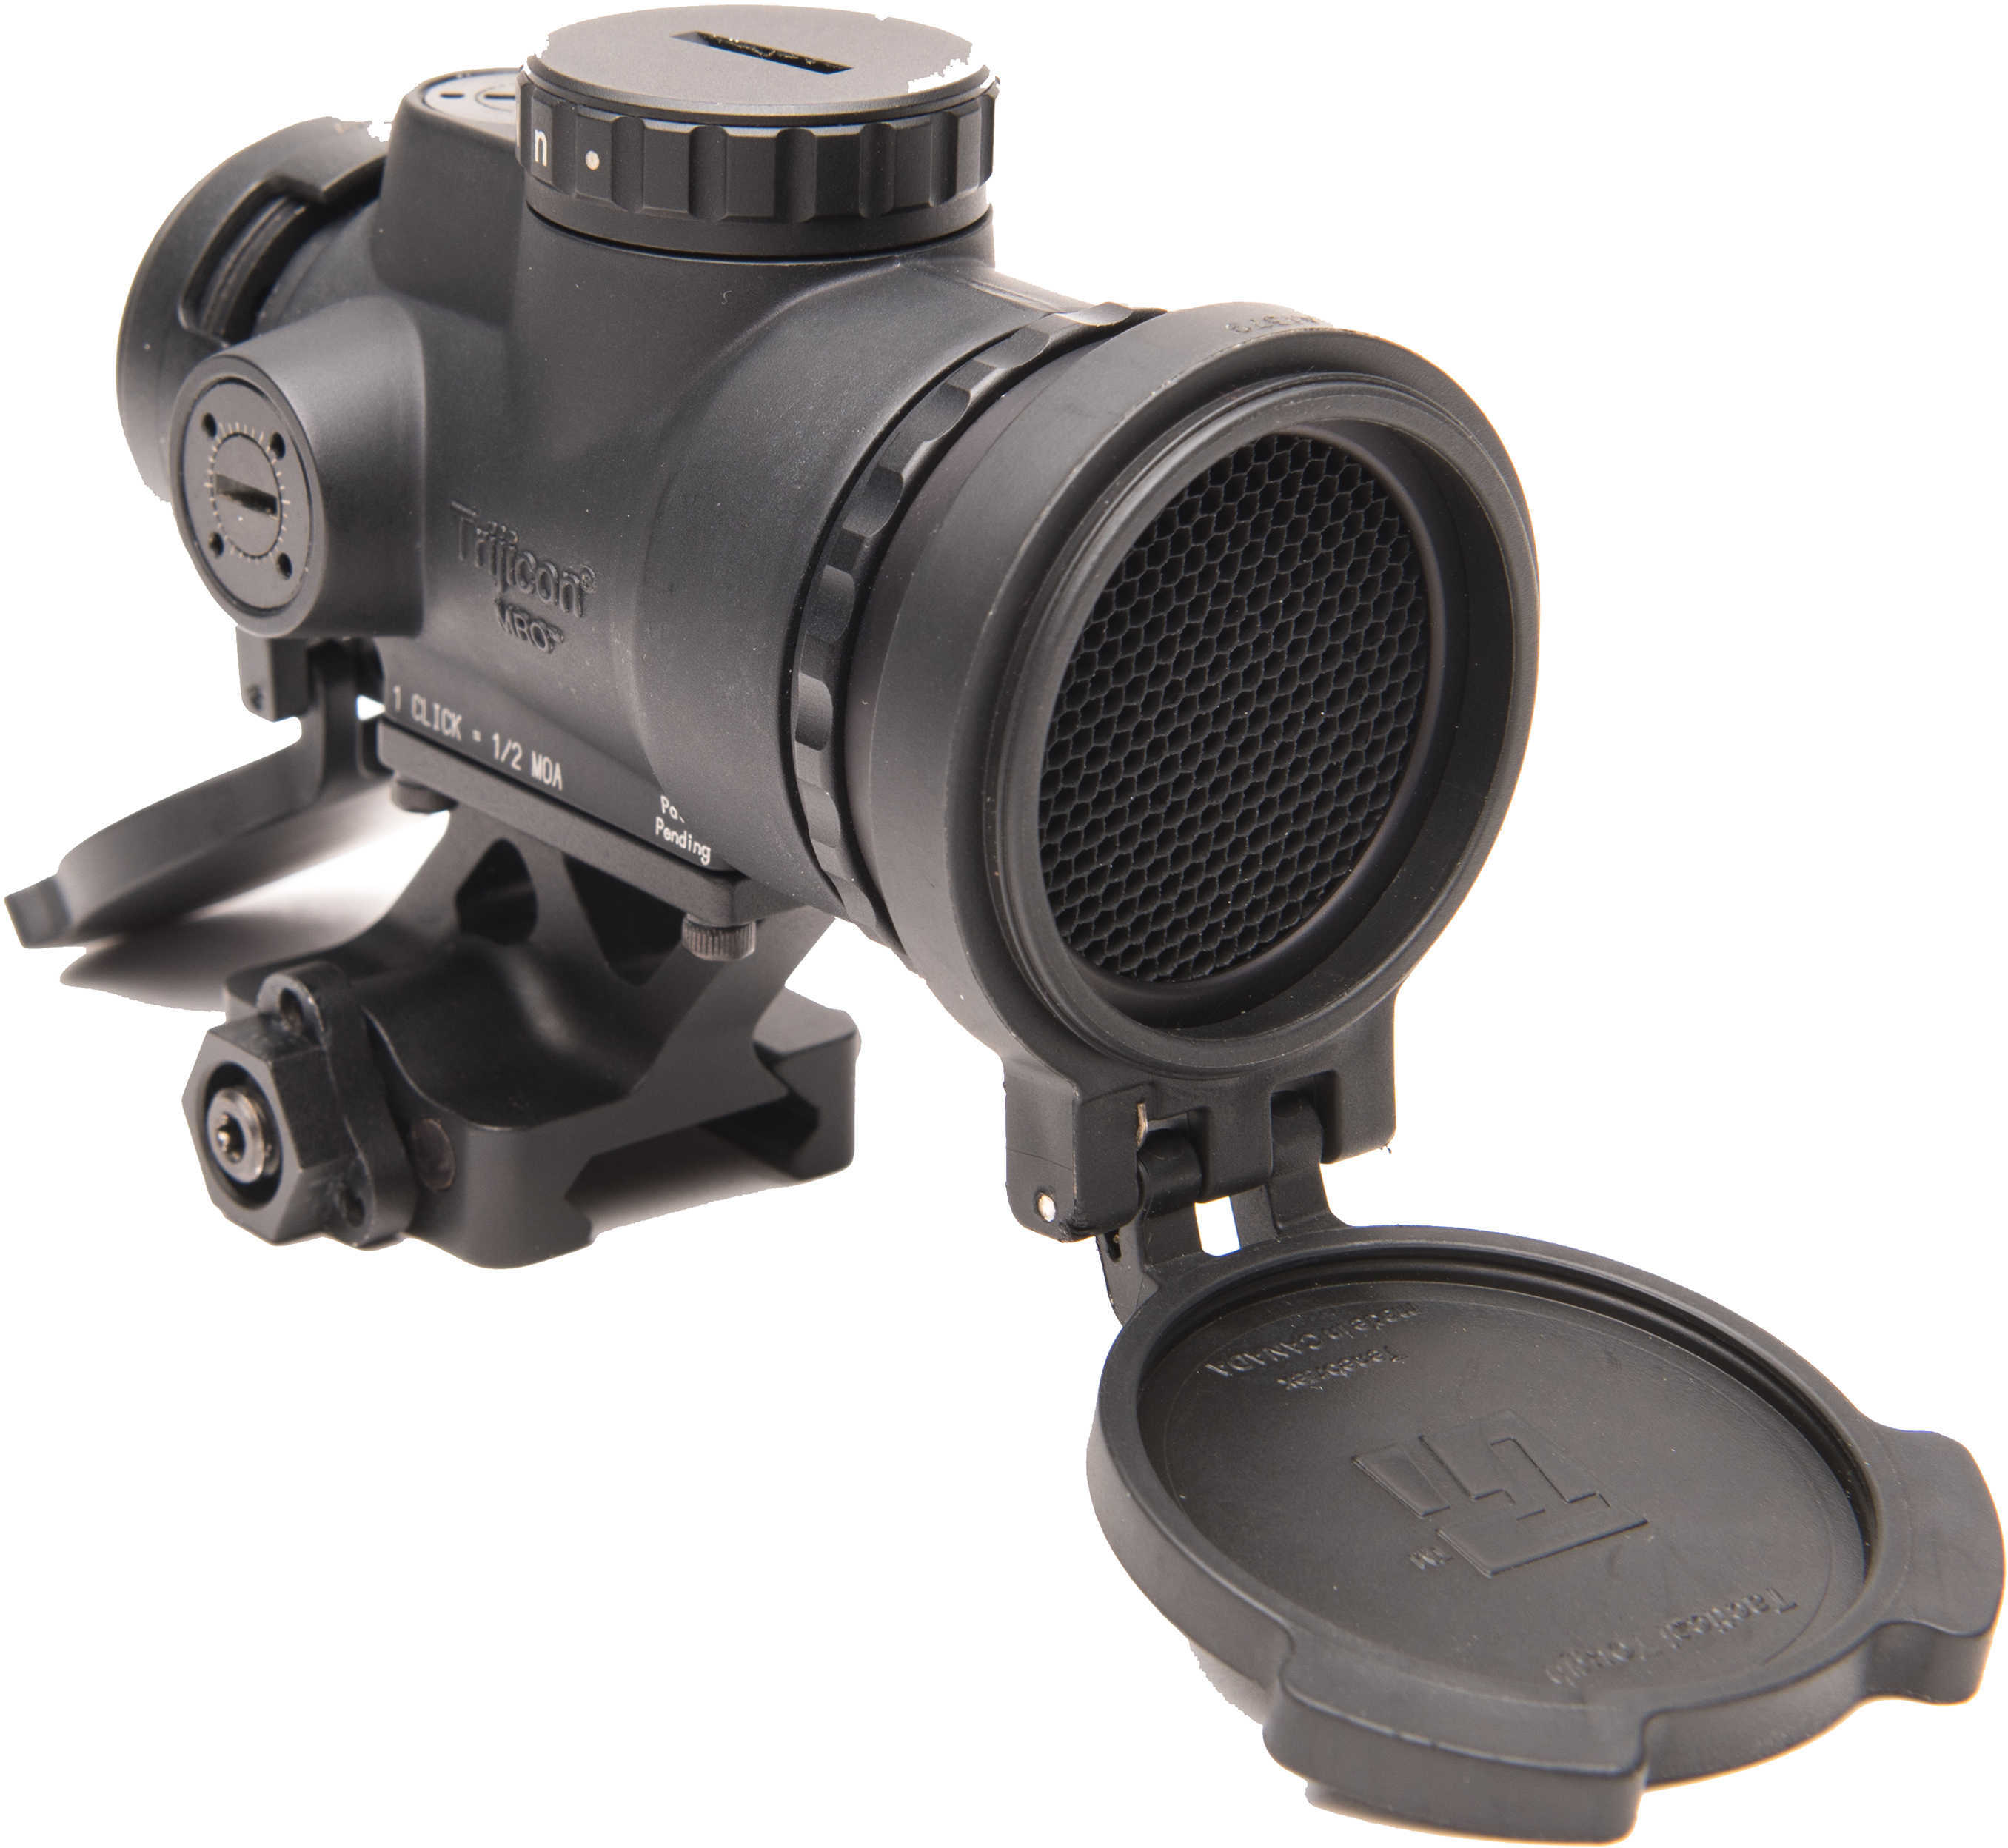 Trijicon 2200019 MRO Patrol 1x 25mm 2 MOA Illuminated Red Dot CR2032 Lithium Black with Co-Witness